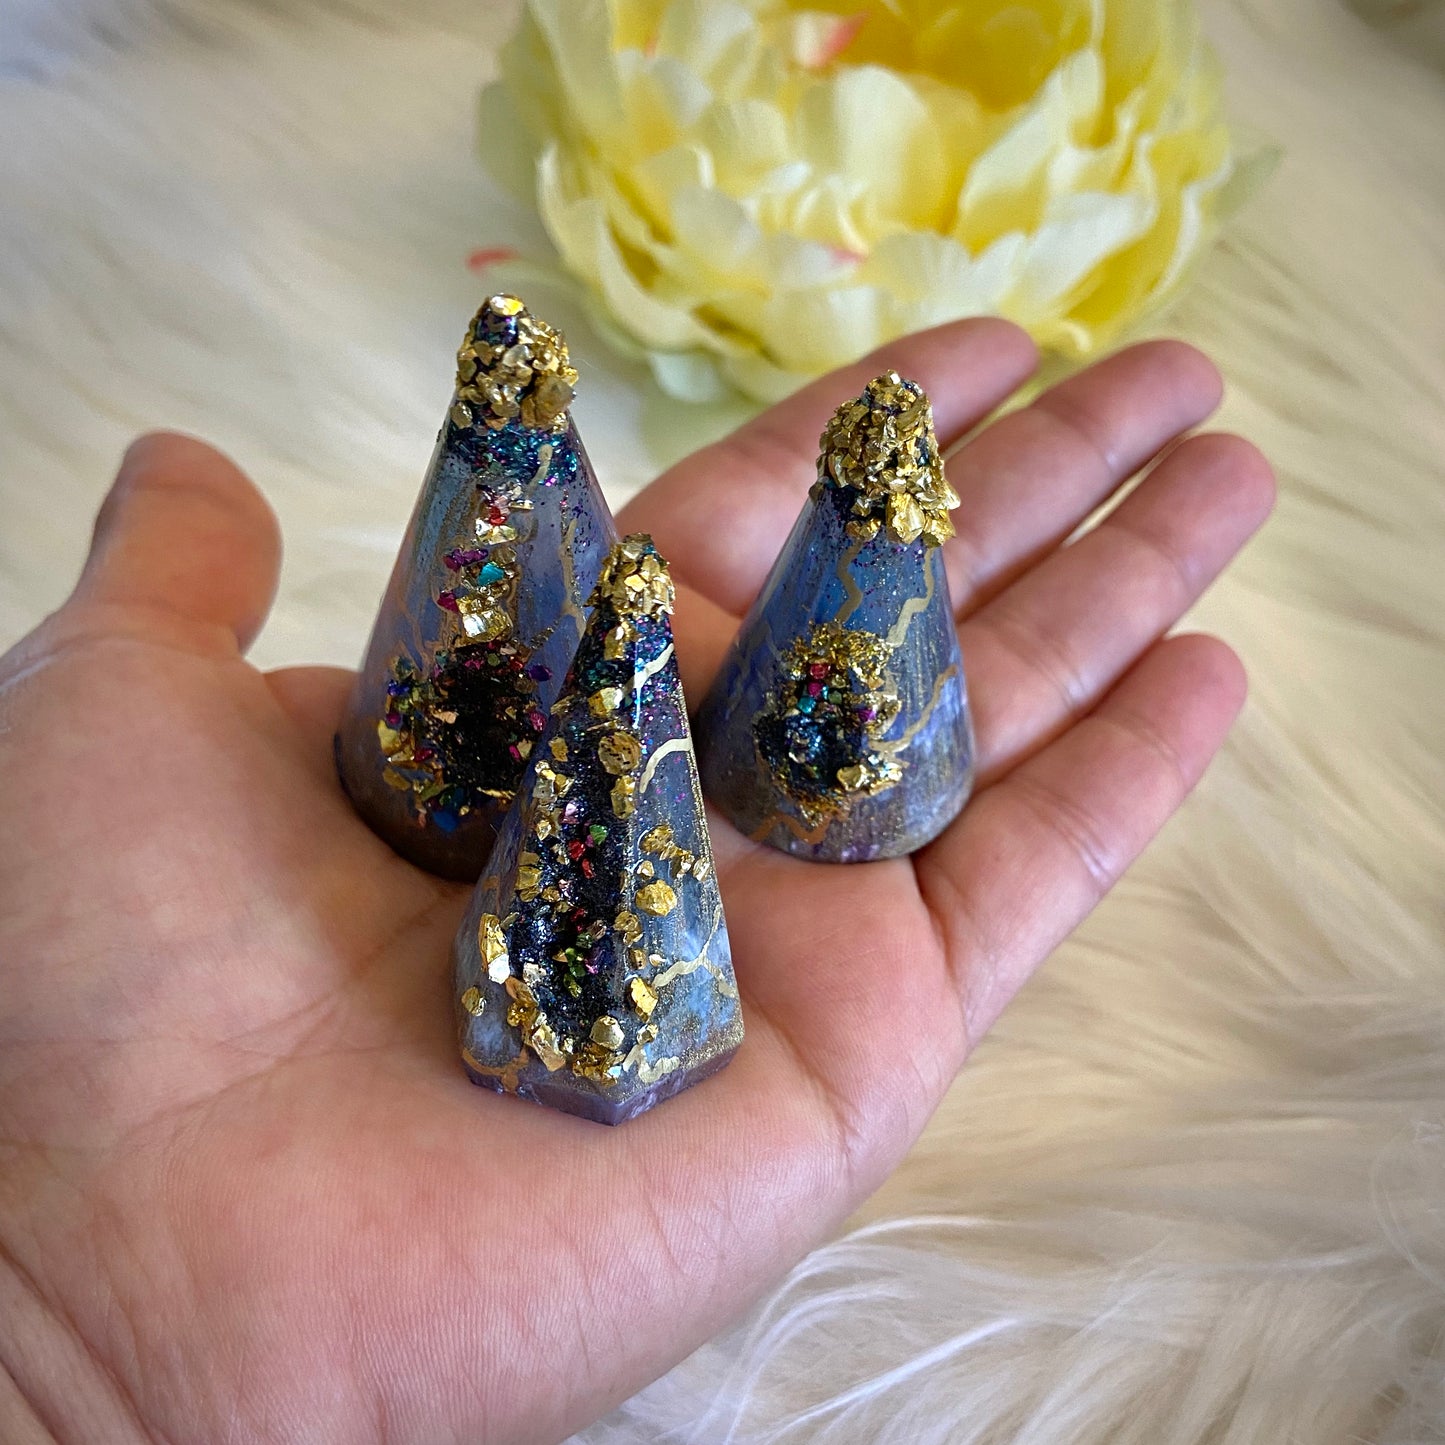 set of 3 ring holders in geode style - Mamota Creative